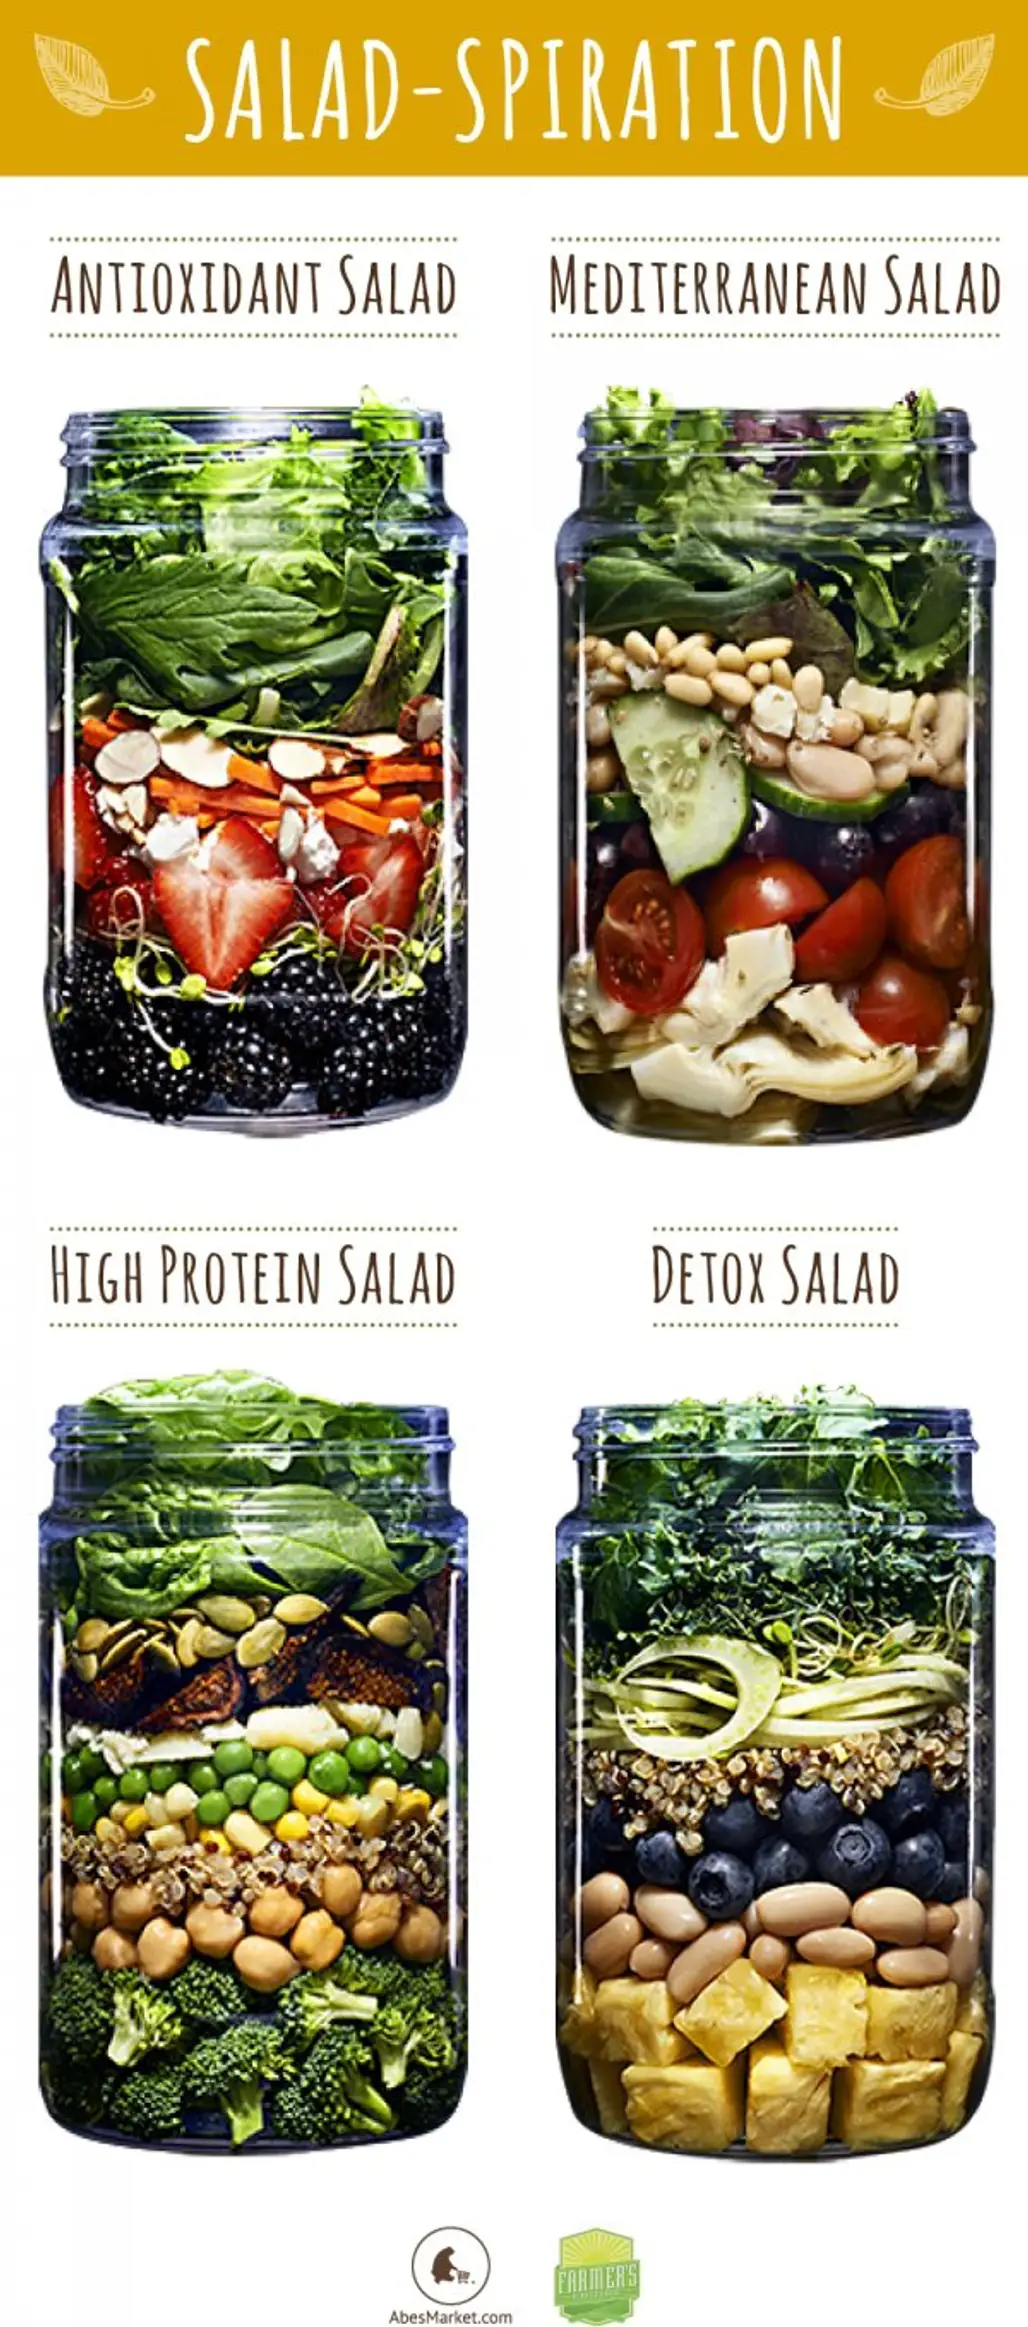 A Month Worth of "Salad in a Jar" Recipes